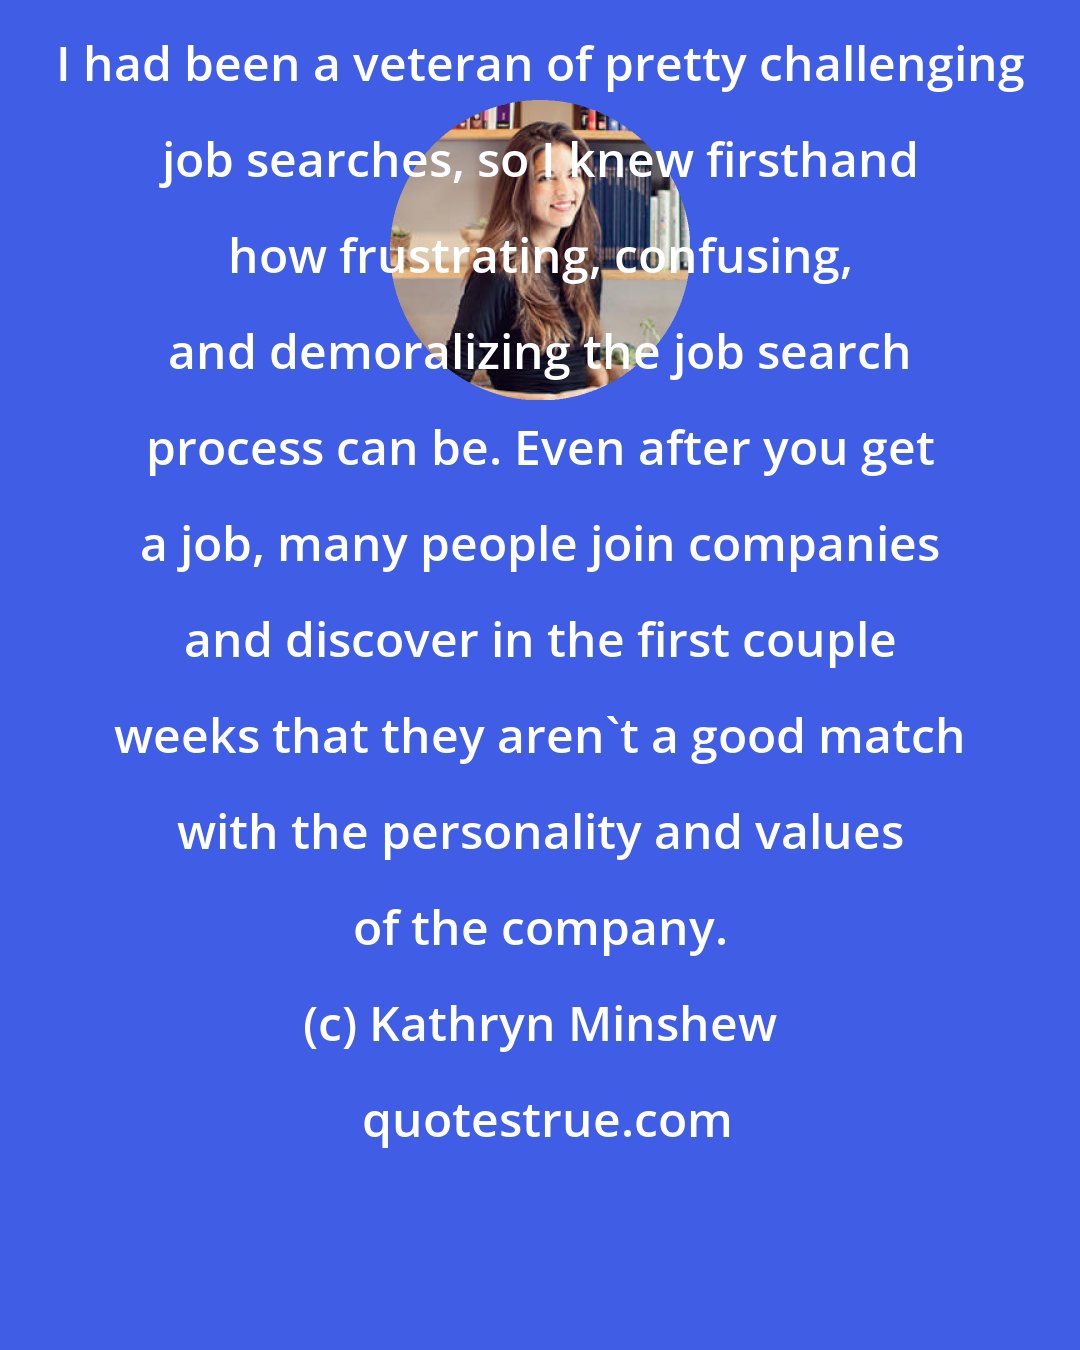 Kathryn Minshew: I had been a veteran of pretty challenging job searches, so I knew firsthand how frustrating, confusing, and demoralizing the job search process can be. Even after you get a job, many people join companies and discover in the first couple weeks that they aren't a good match with the personality and values of the company.